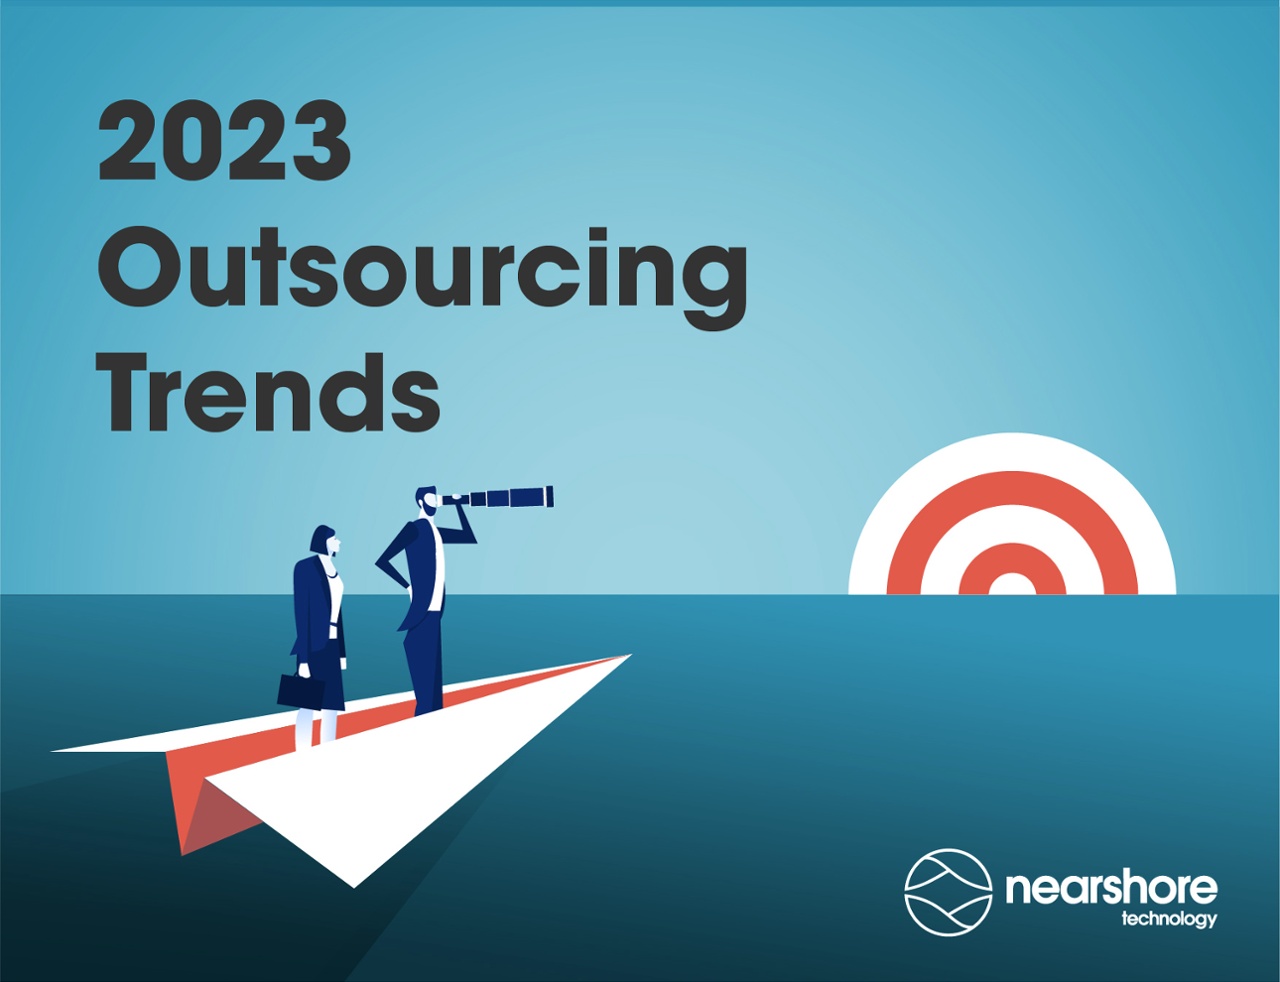 3 Outsourcing Trends to Look For in 2023